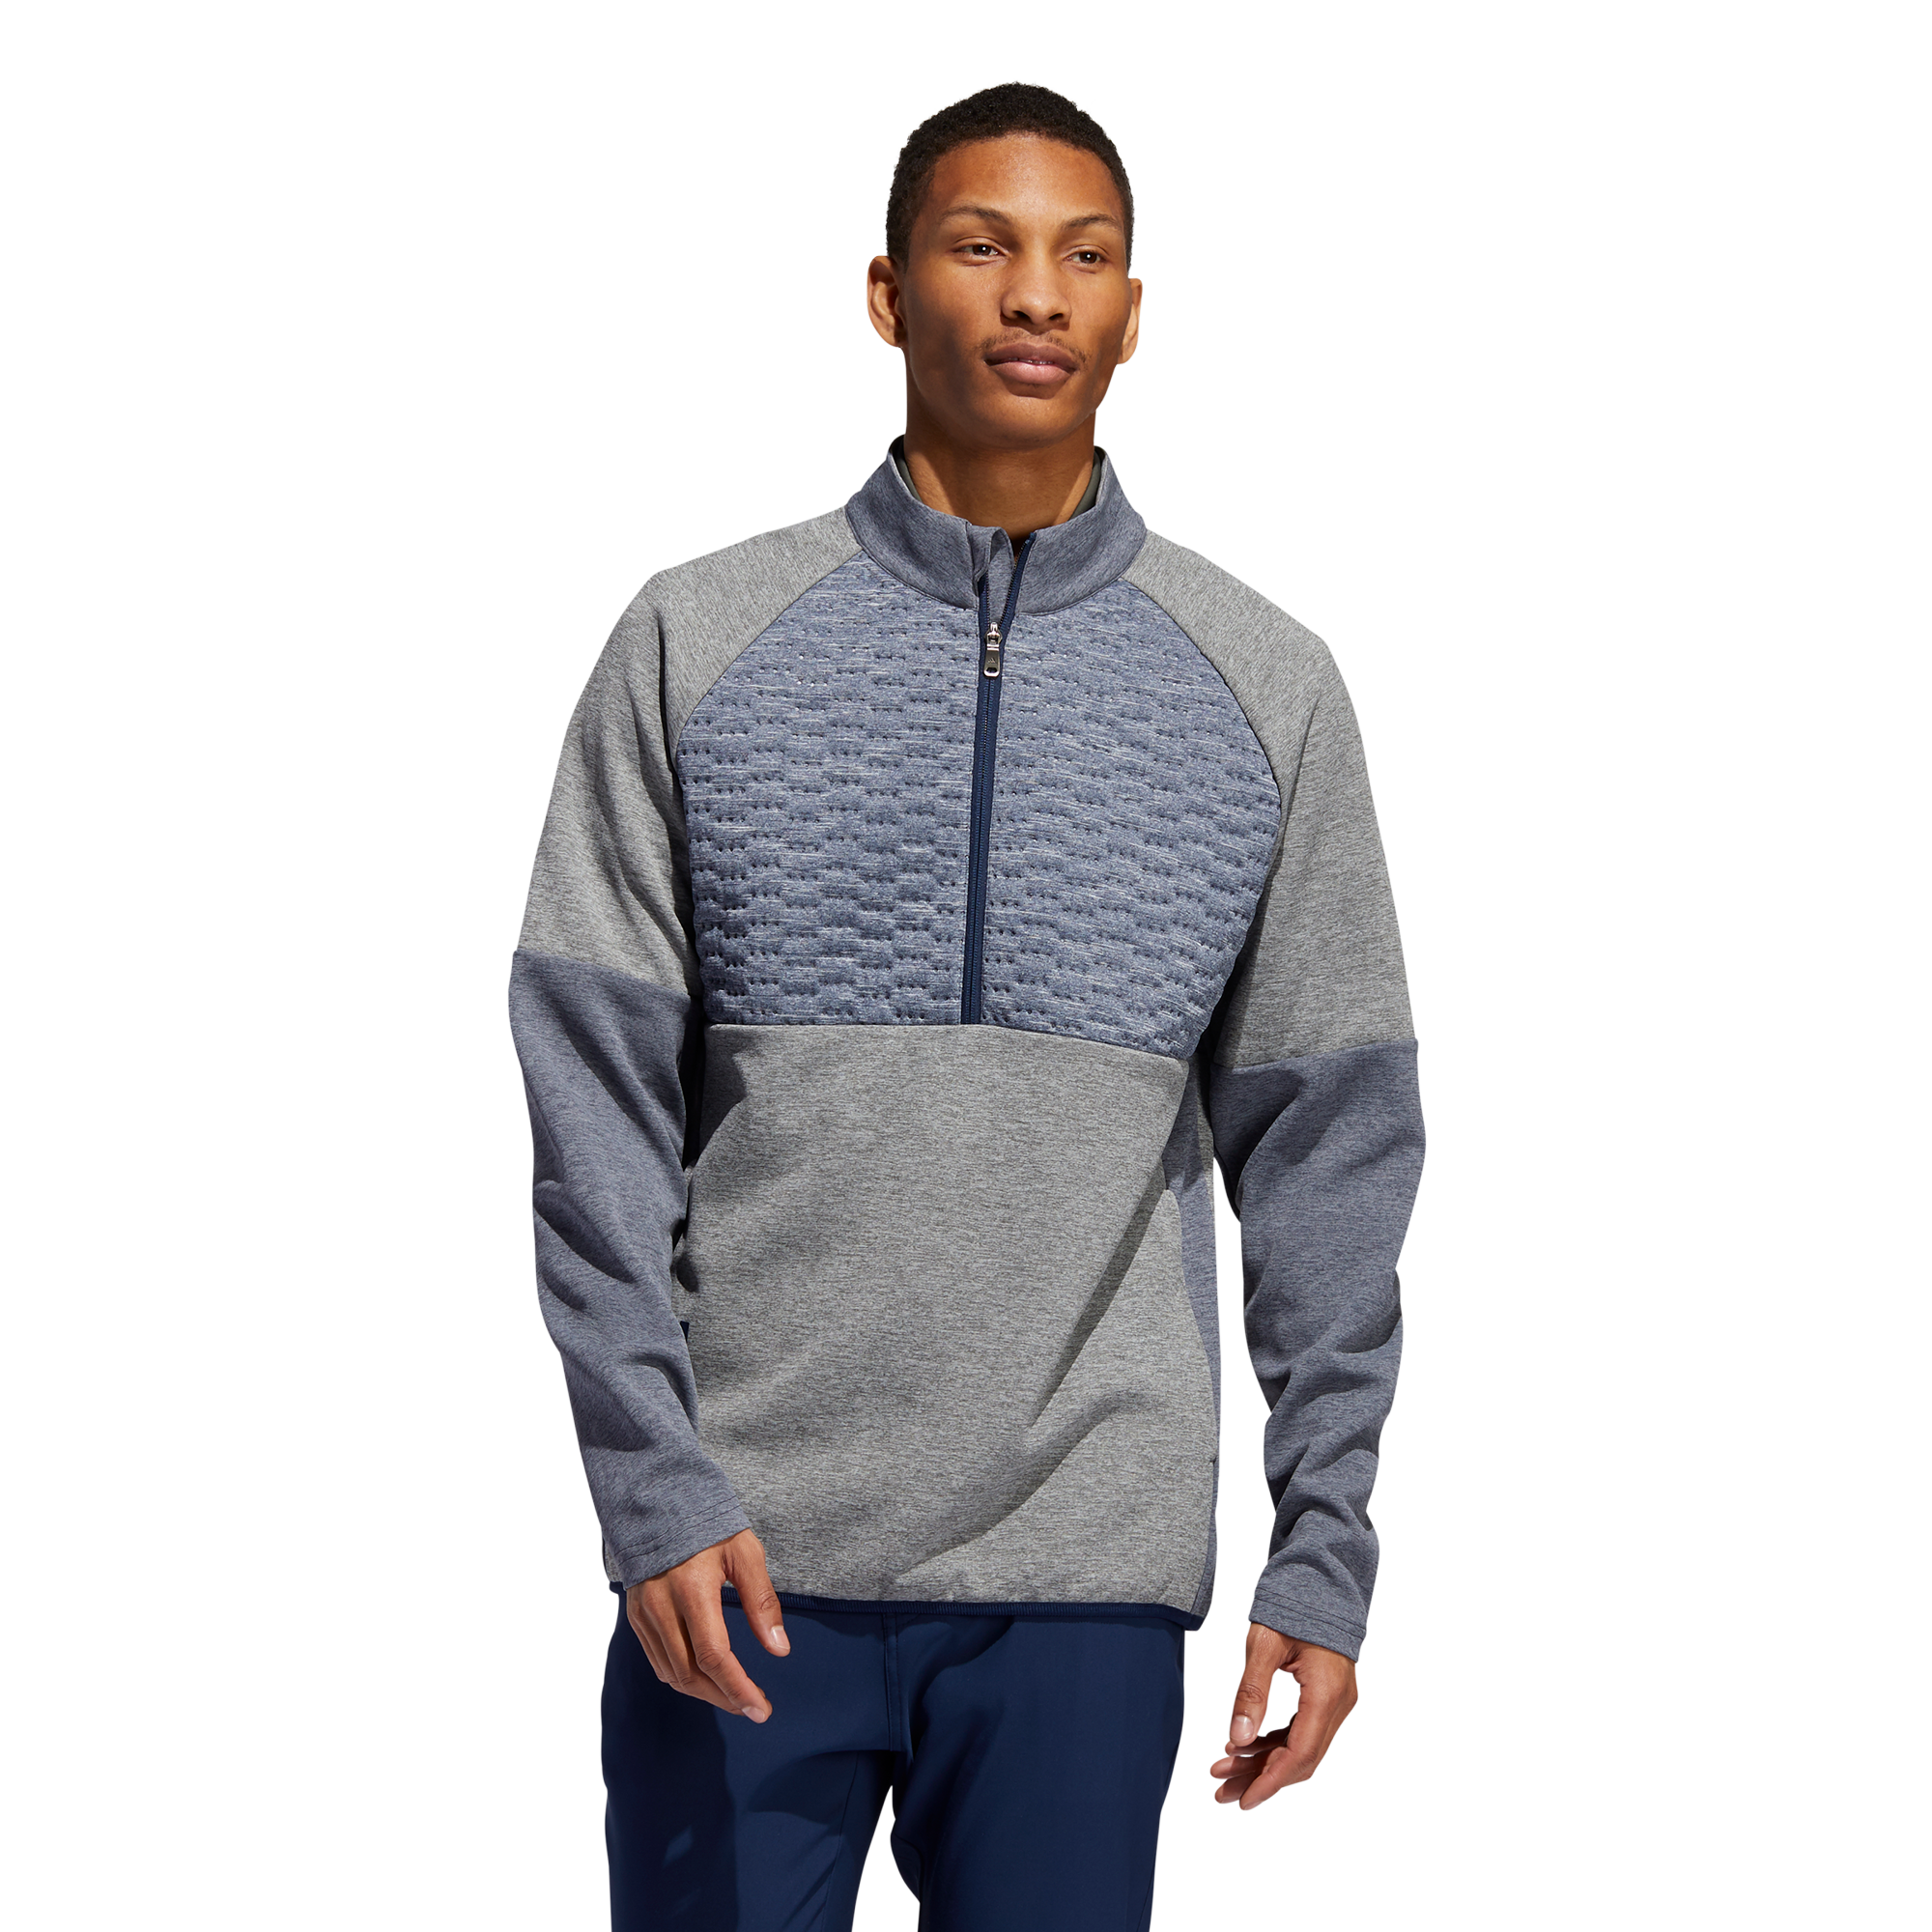 Legend Earth FROSTGUARD QUILTED COMPETITION 1/4 ZIP PULLOVER - MALE /